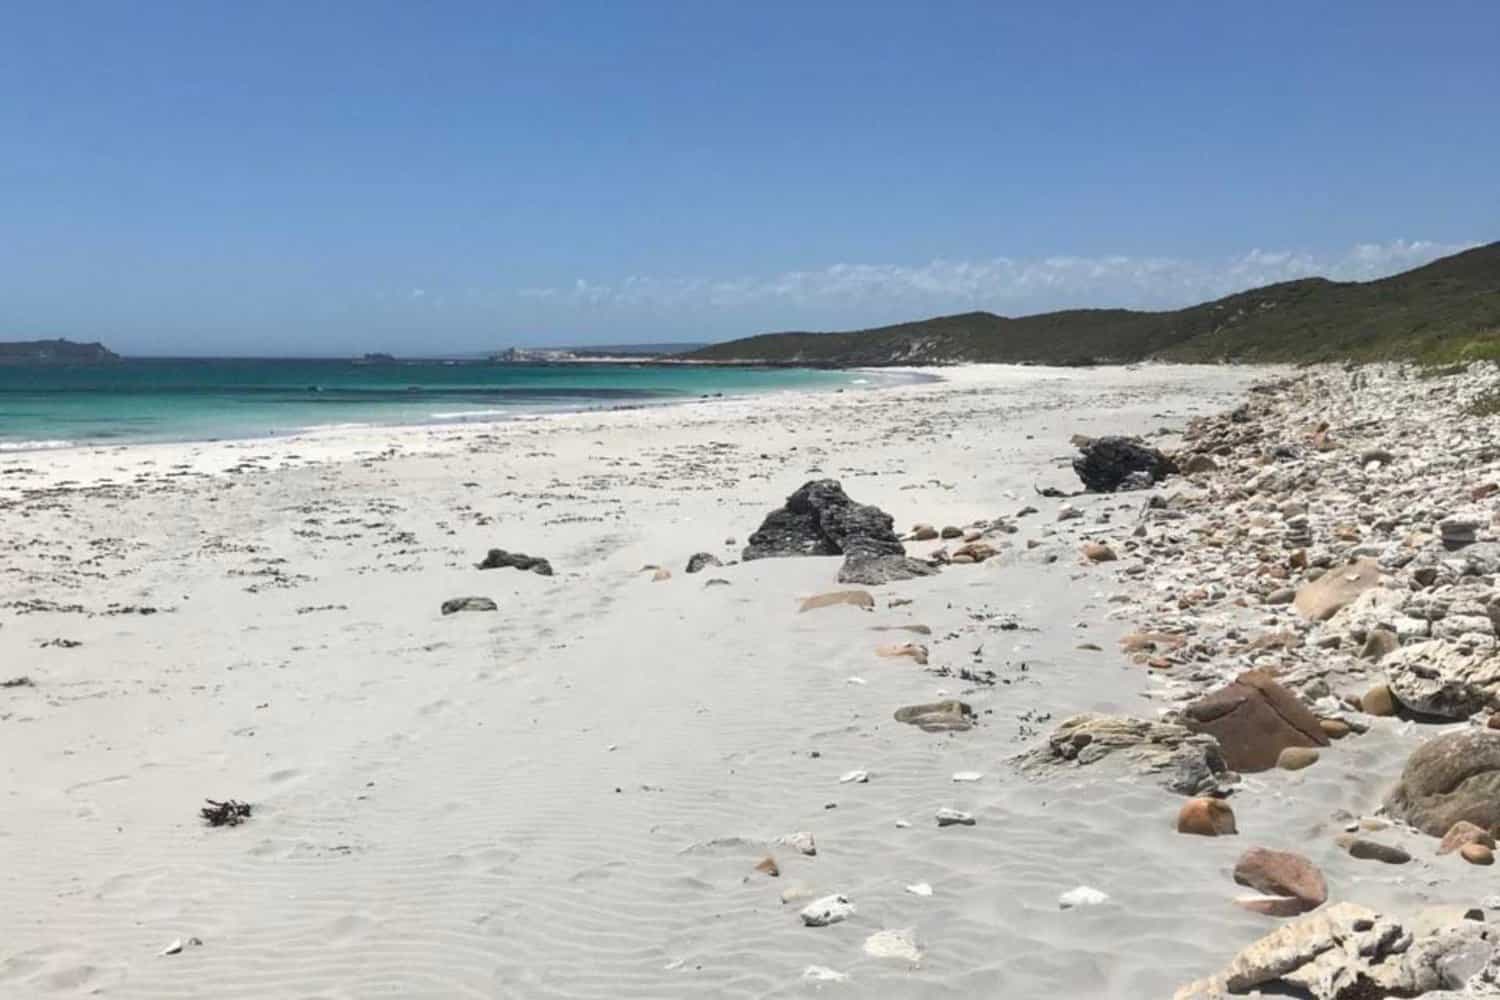 The untouched beauty of the Augusta beach, Foul Bay, is captured in this image, where a stretch of white sandy beach scattered with seaweed and rocks leads to the serene turquoise waters, with hints of distant headlands under a soft blue sky.